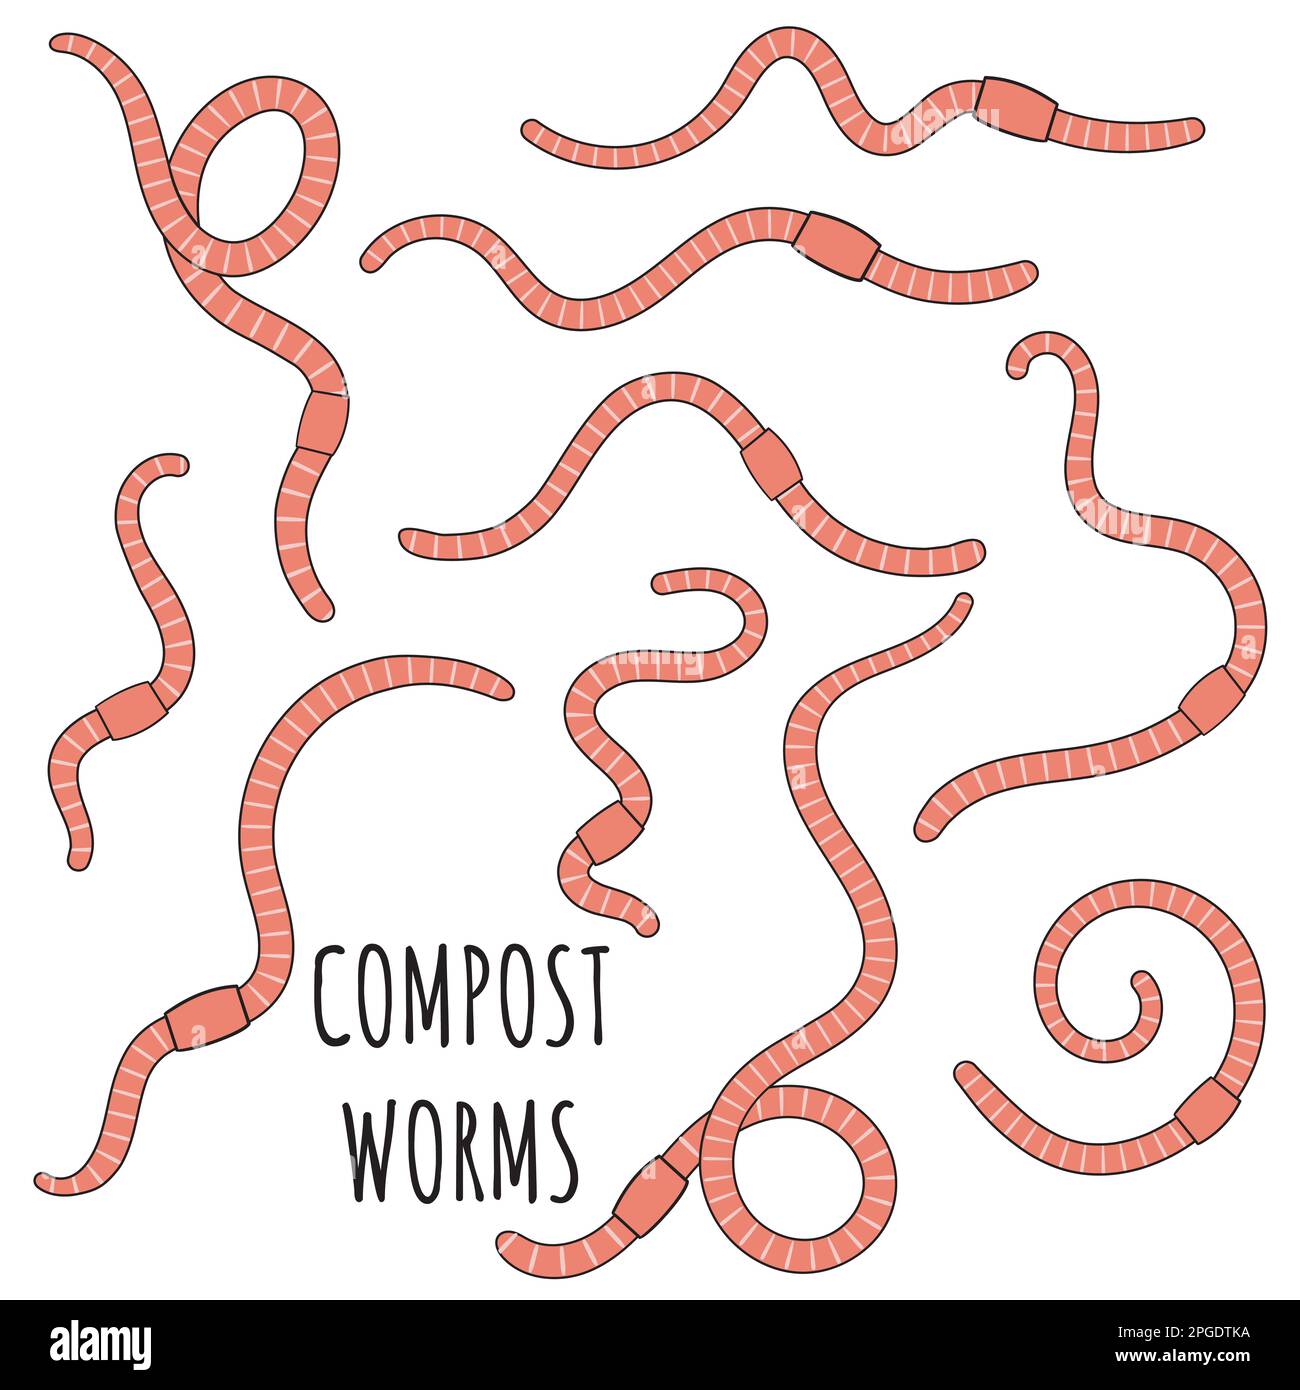 Set of pink earthworms. Worms for vermicomposting. Farming and agriculture. Hand drawn vector illustration. Stock Vector